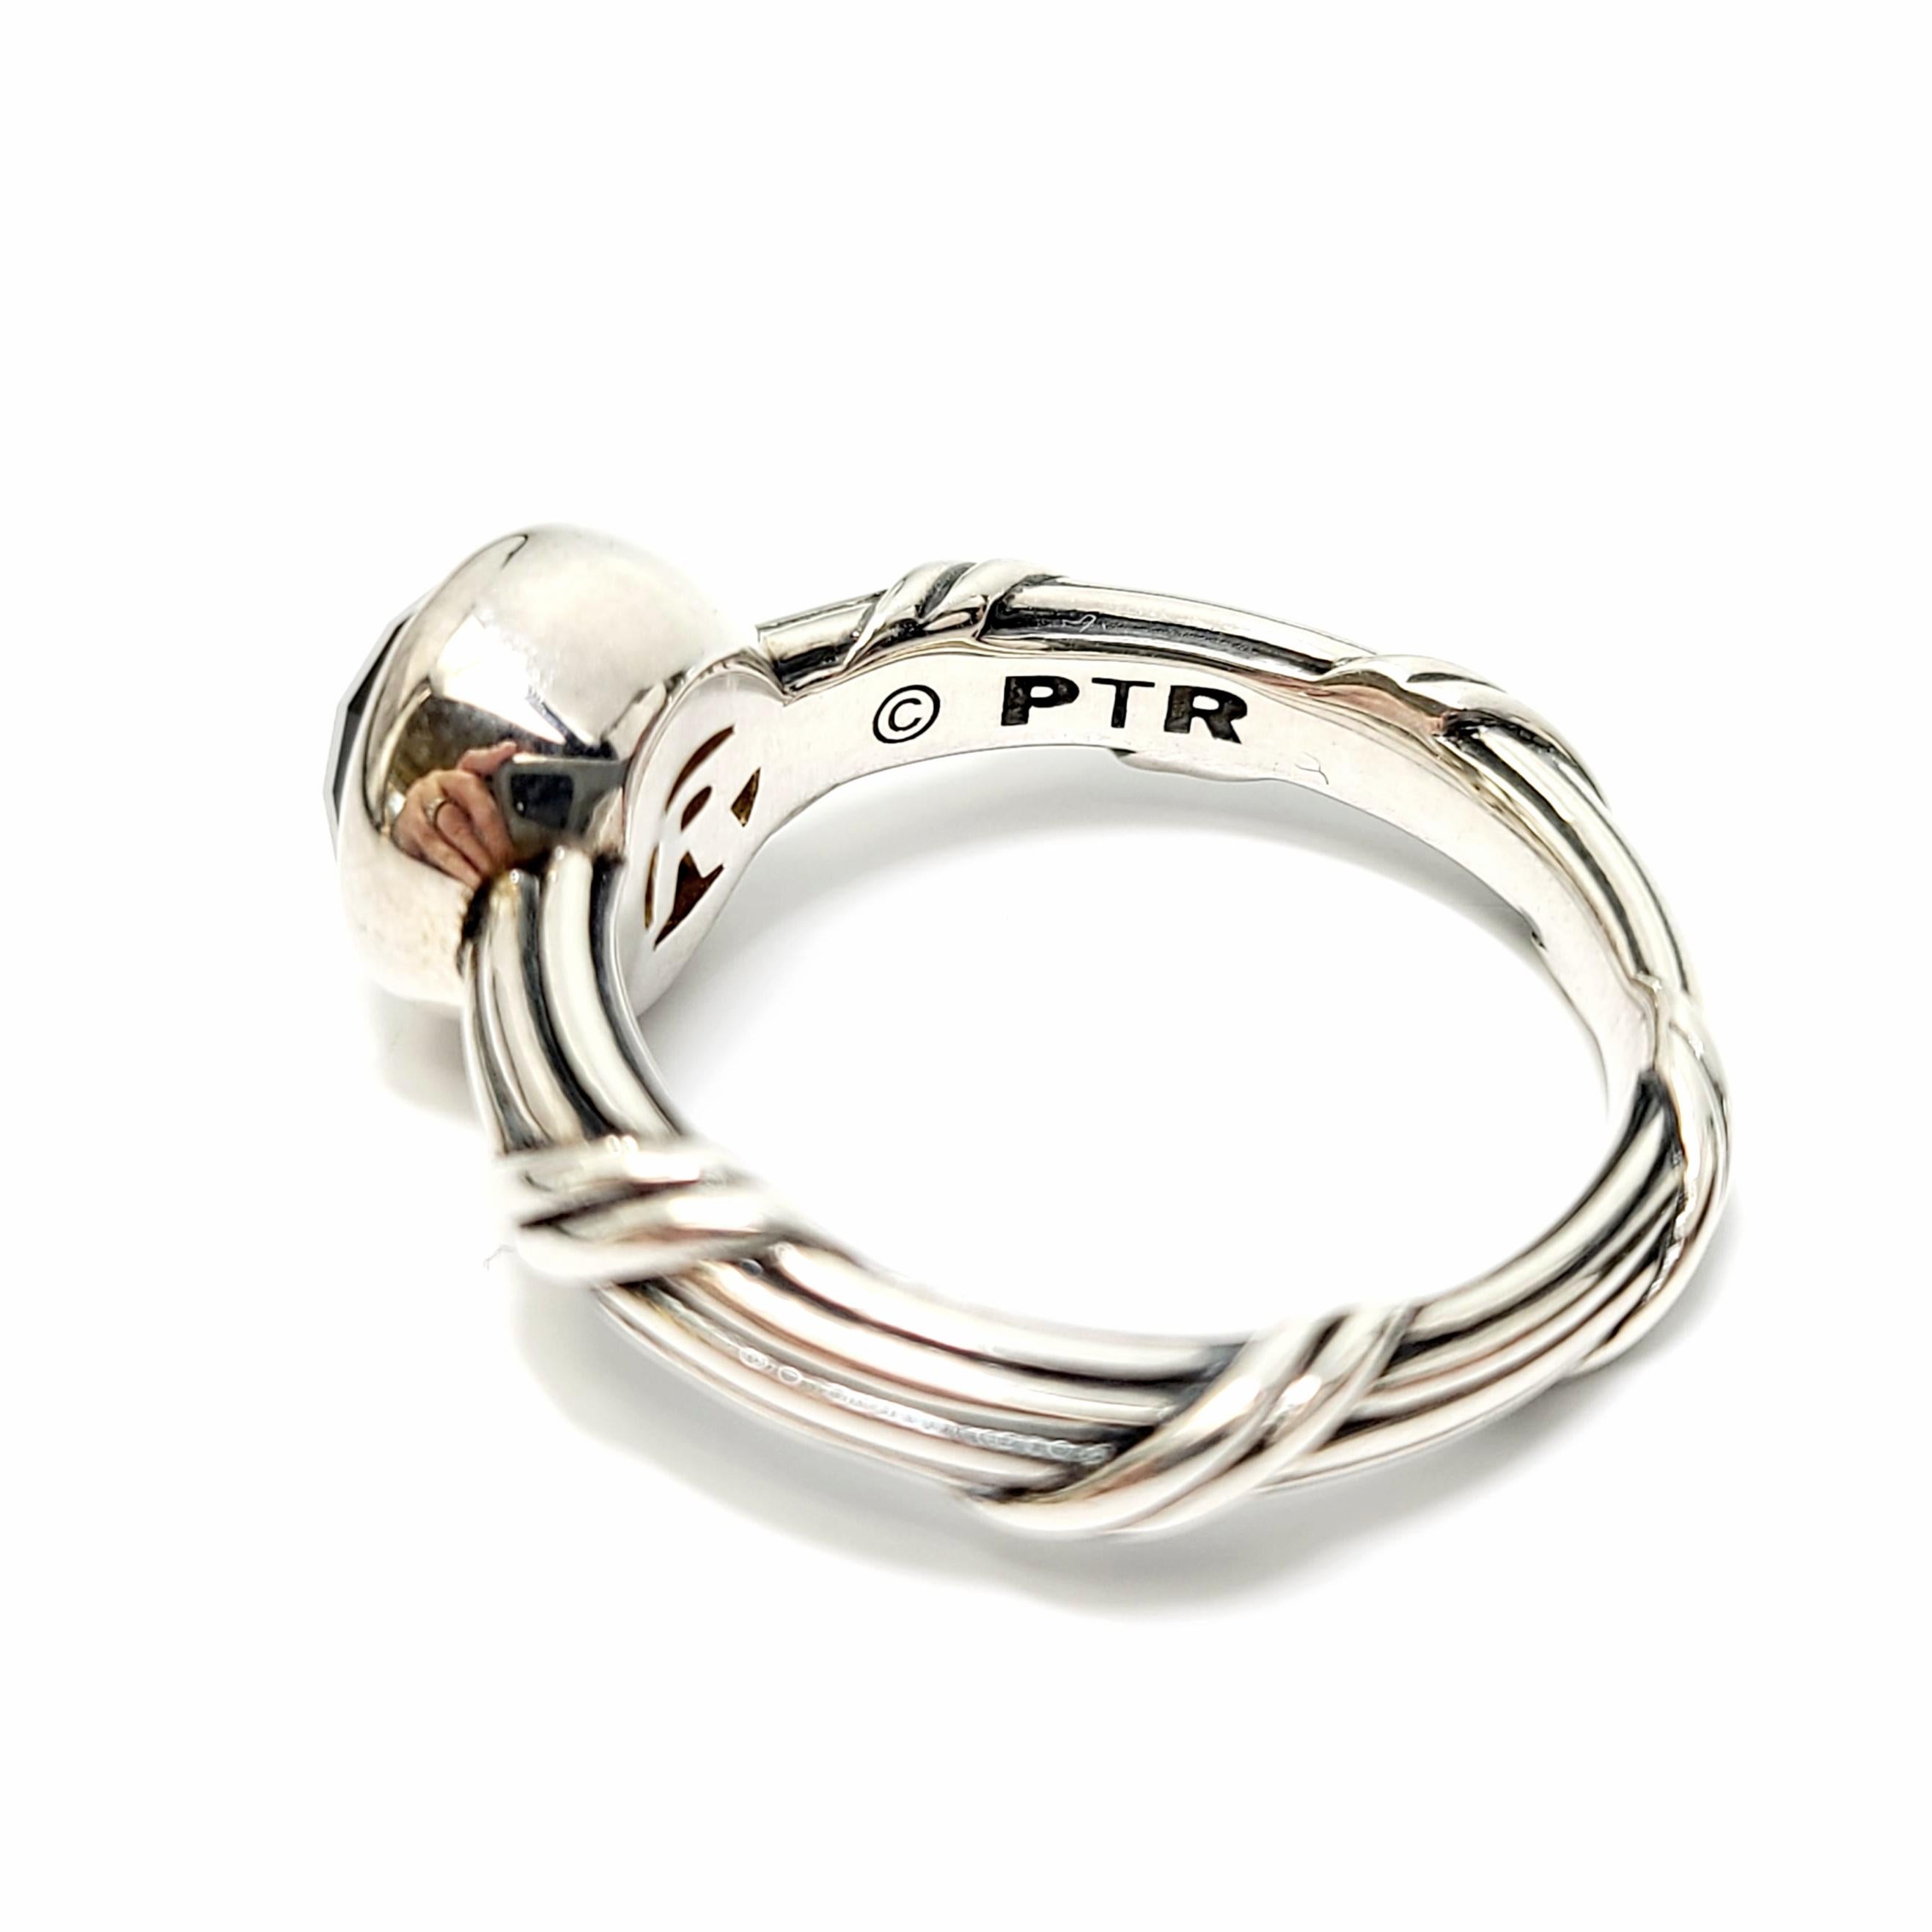 Briolette Cut Peter Thomas Roth Sterling Silver Quartz Fantasies Ring with Stackable Bands